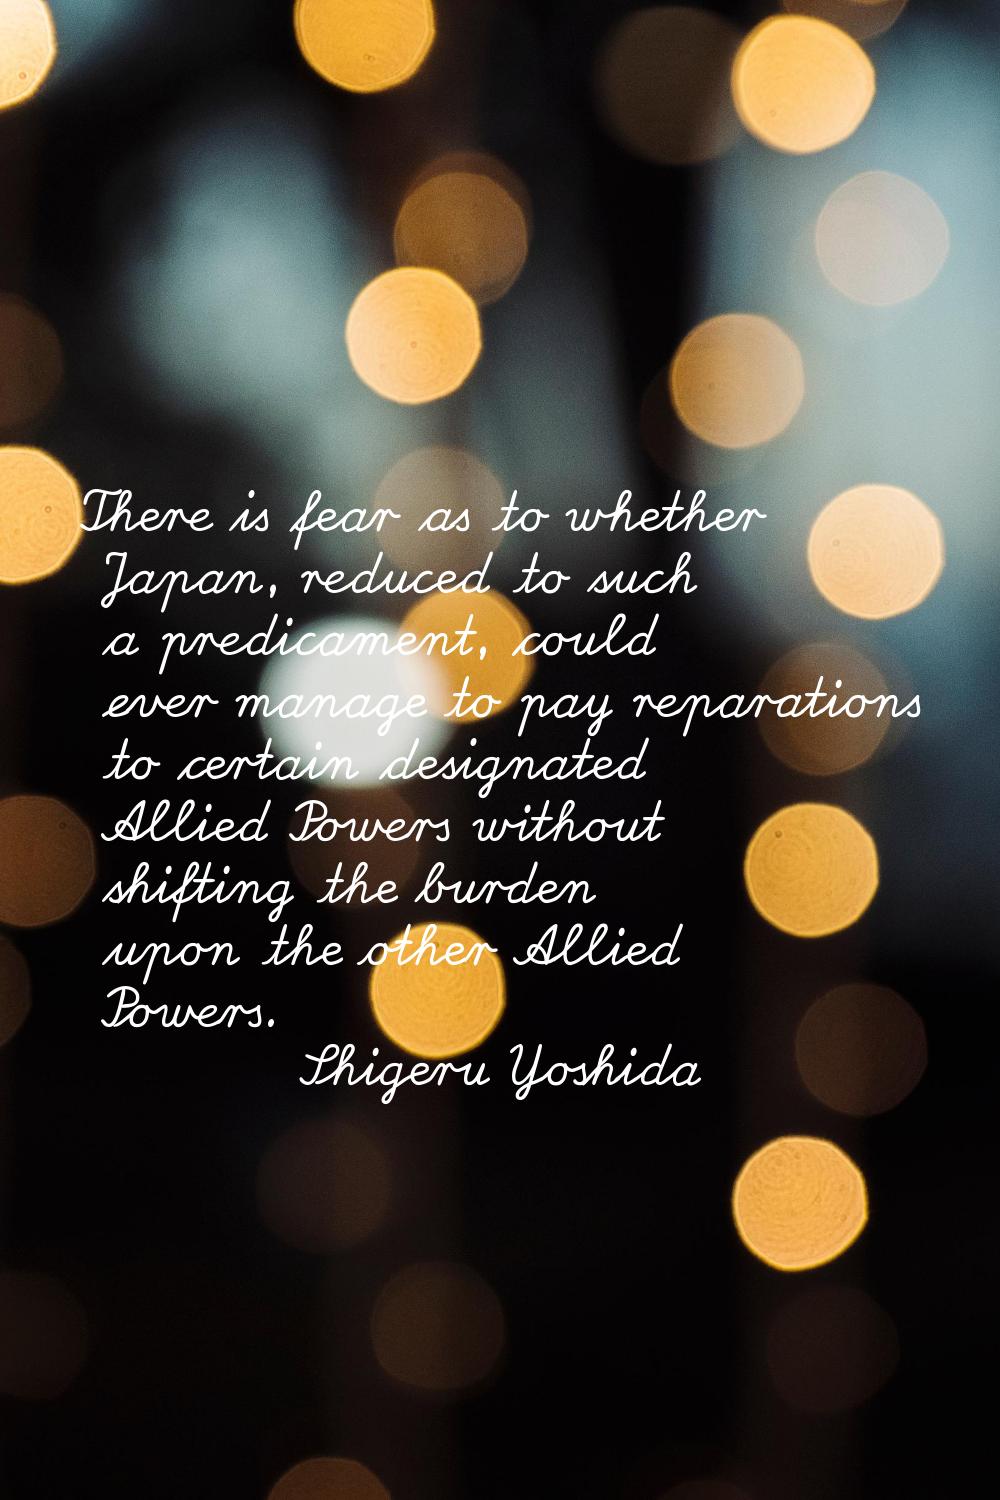 There is fear as to whether Japan, reduced to such a predicament, could ever manage to pay reparati